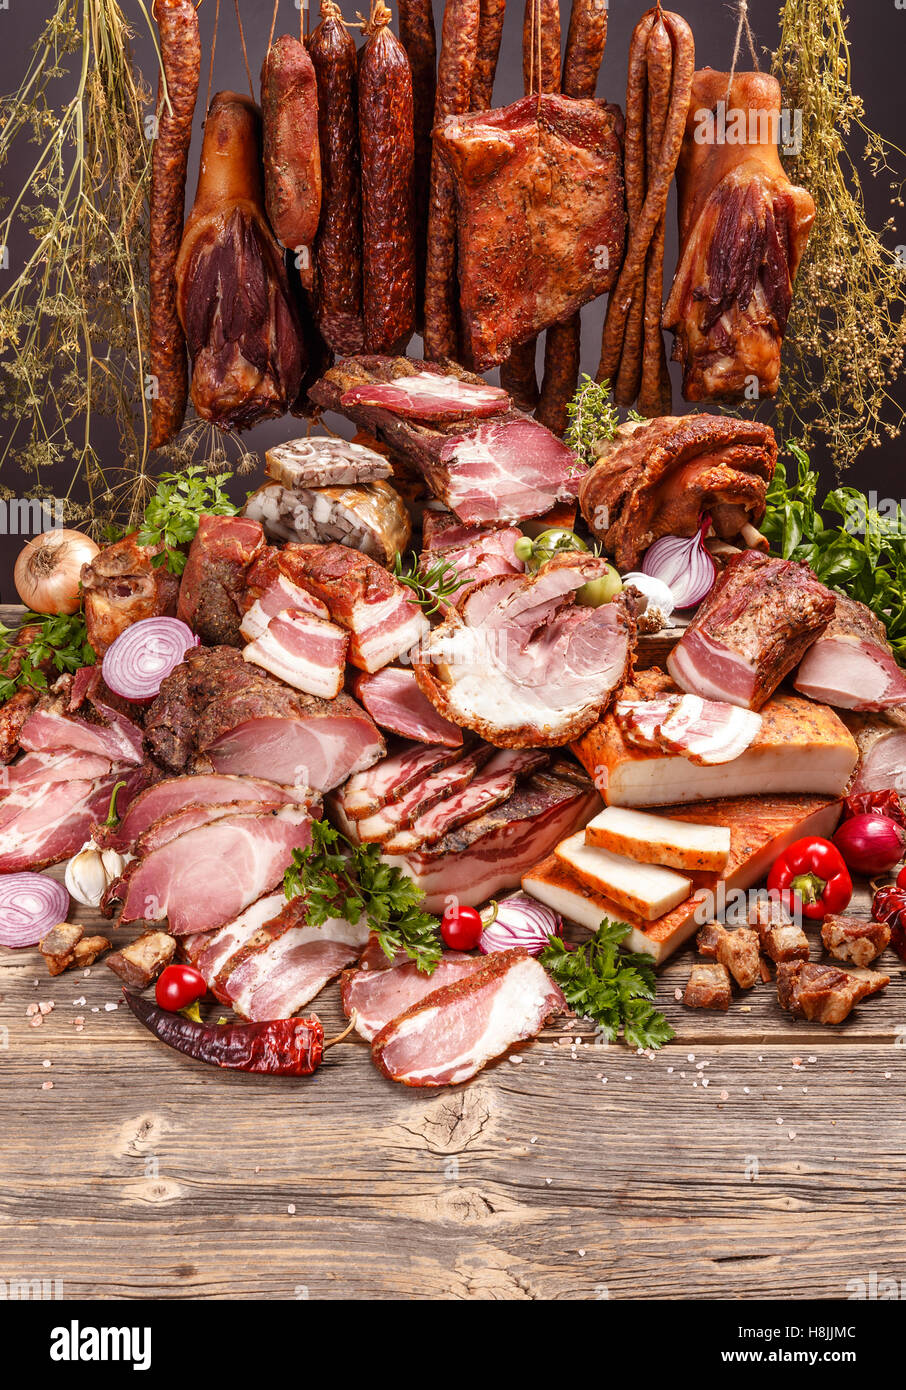 Still life of various pork meat products Stock Photo